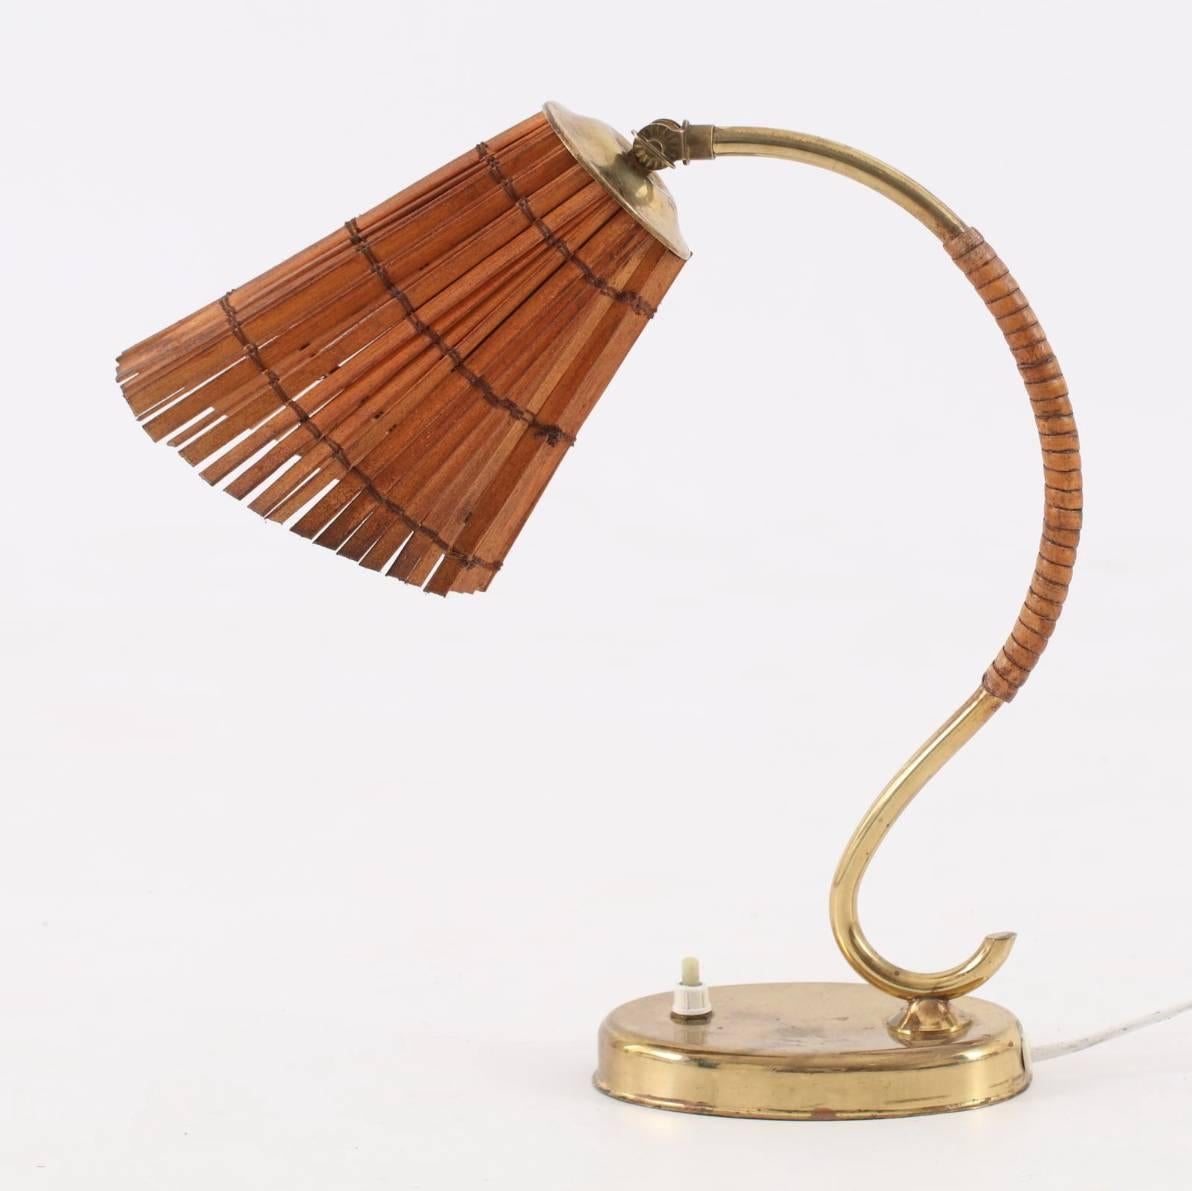 Desk or table lamp produced by Idman, Finland, 1950s. Measures: 48cm high.  Ships worldwide.